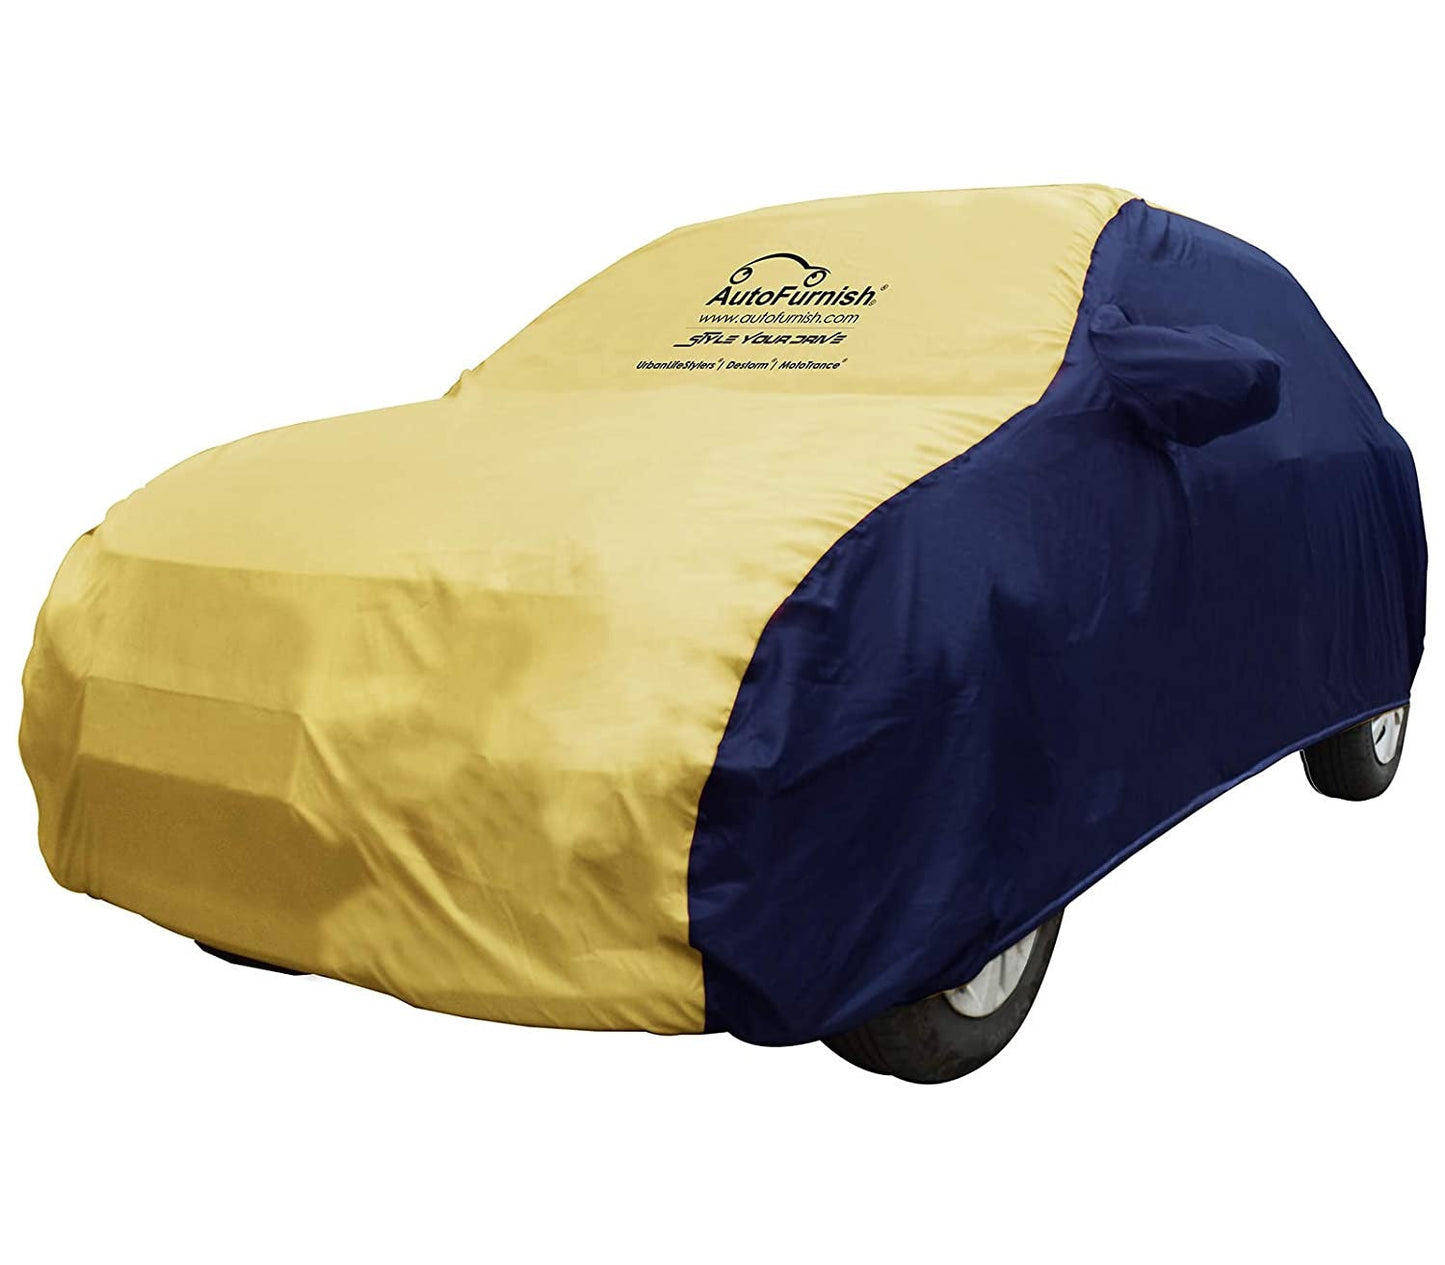 Mercedes C300 (2019) Car Body Cover, Triple Stitched, Heat & Water Resistant with Side Mirror Pockets (SPORTY Series)